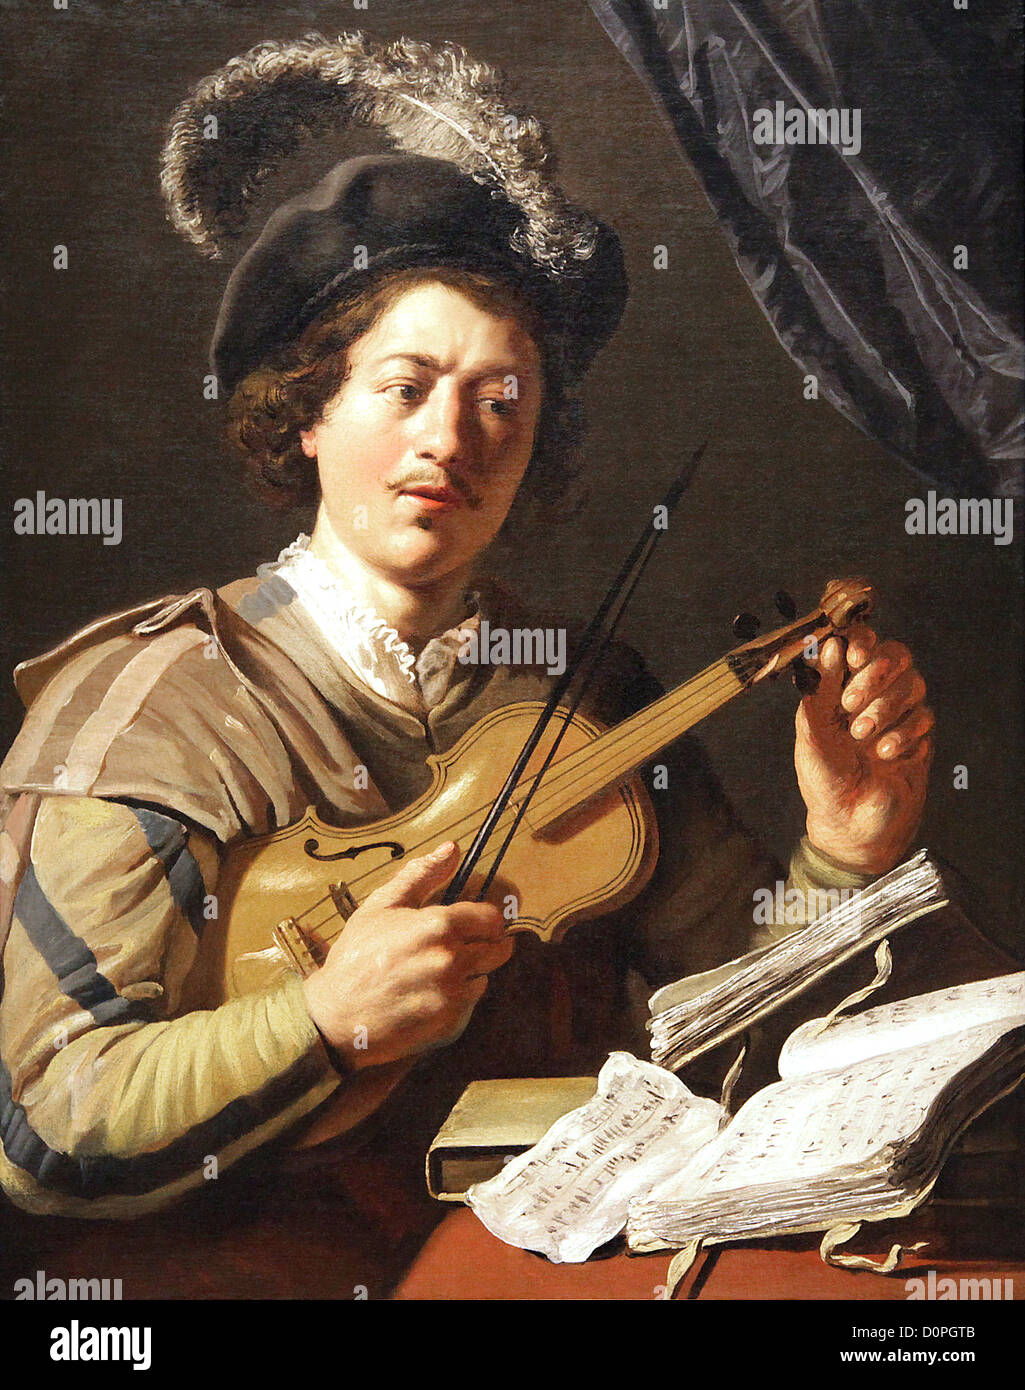 Violin player (1625) by Jan Lievens (1607 – 1674) Influenced by caravaggio.Dutch Golden Age painter associated with Rembrandt van Rijn Stock Photo